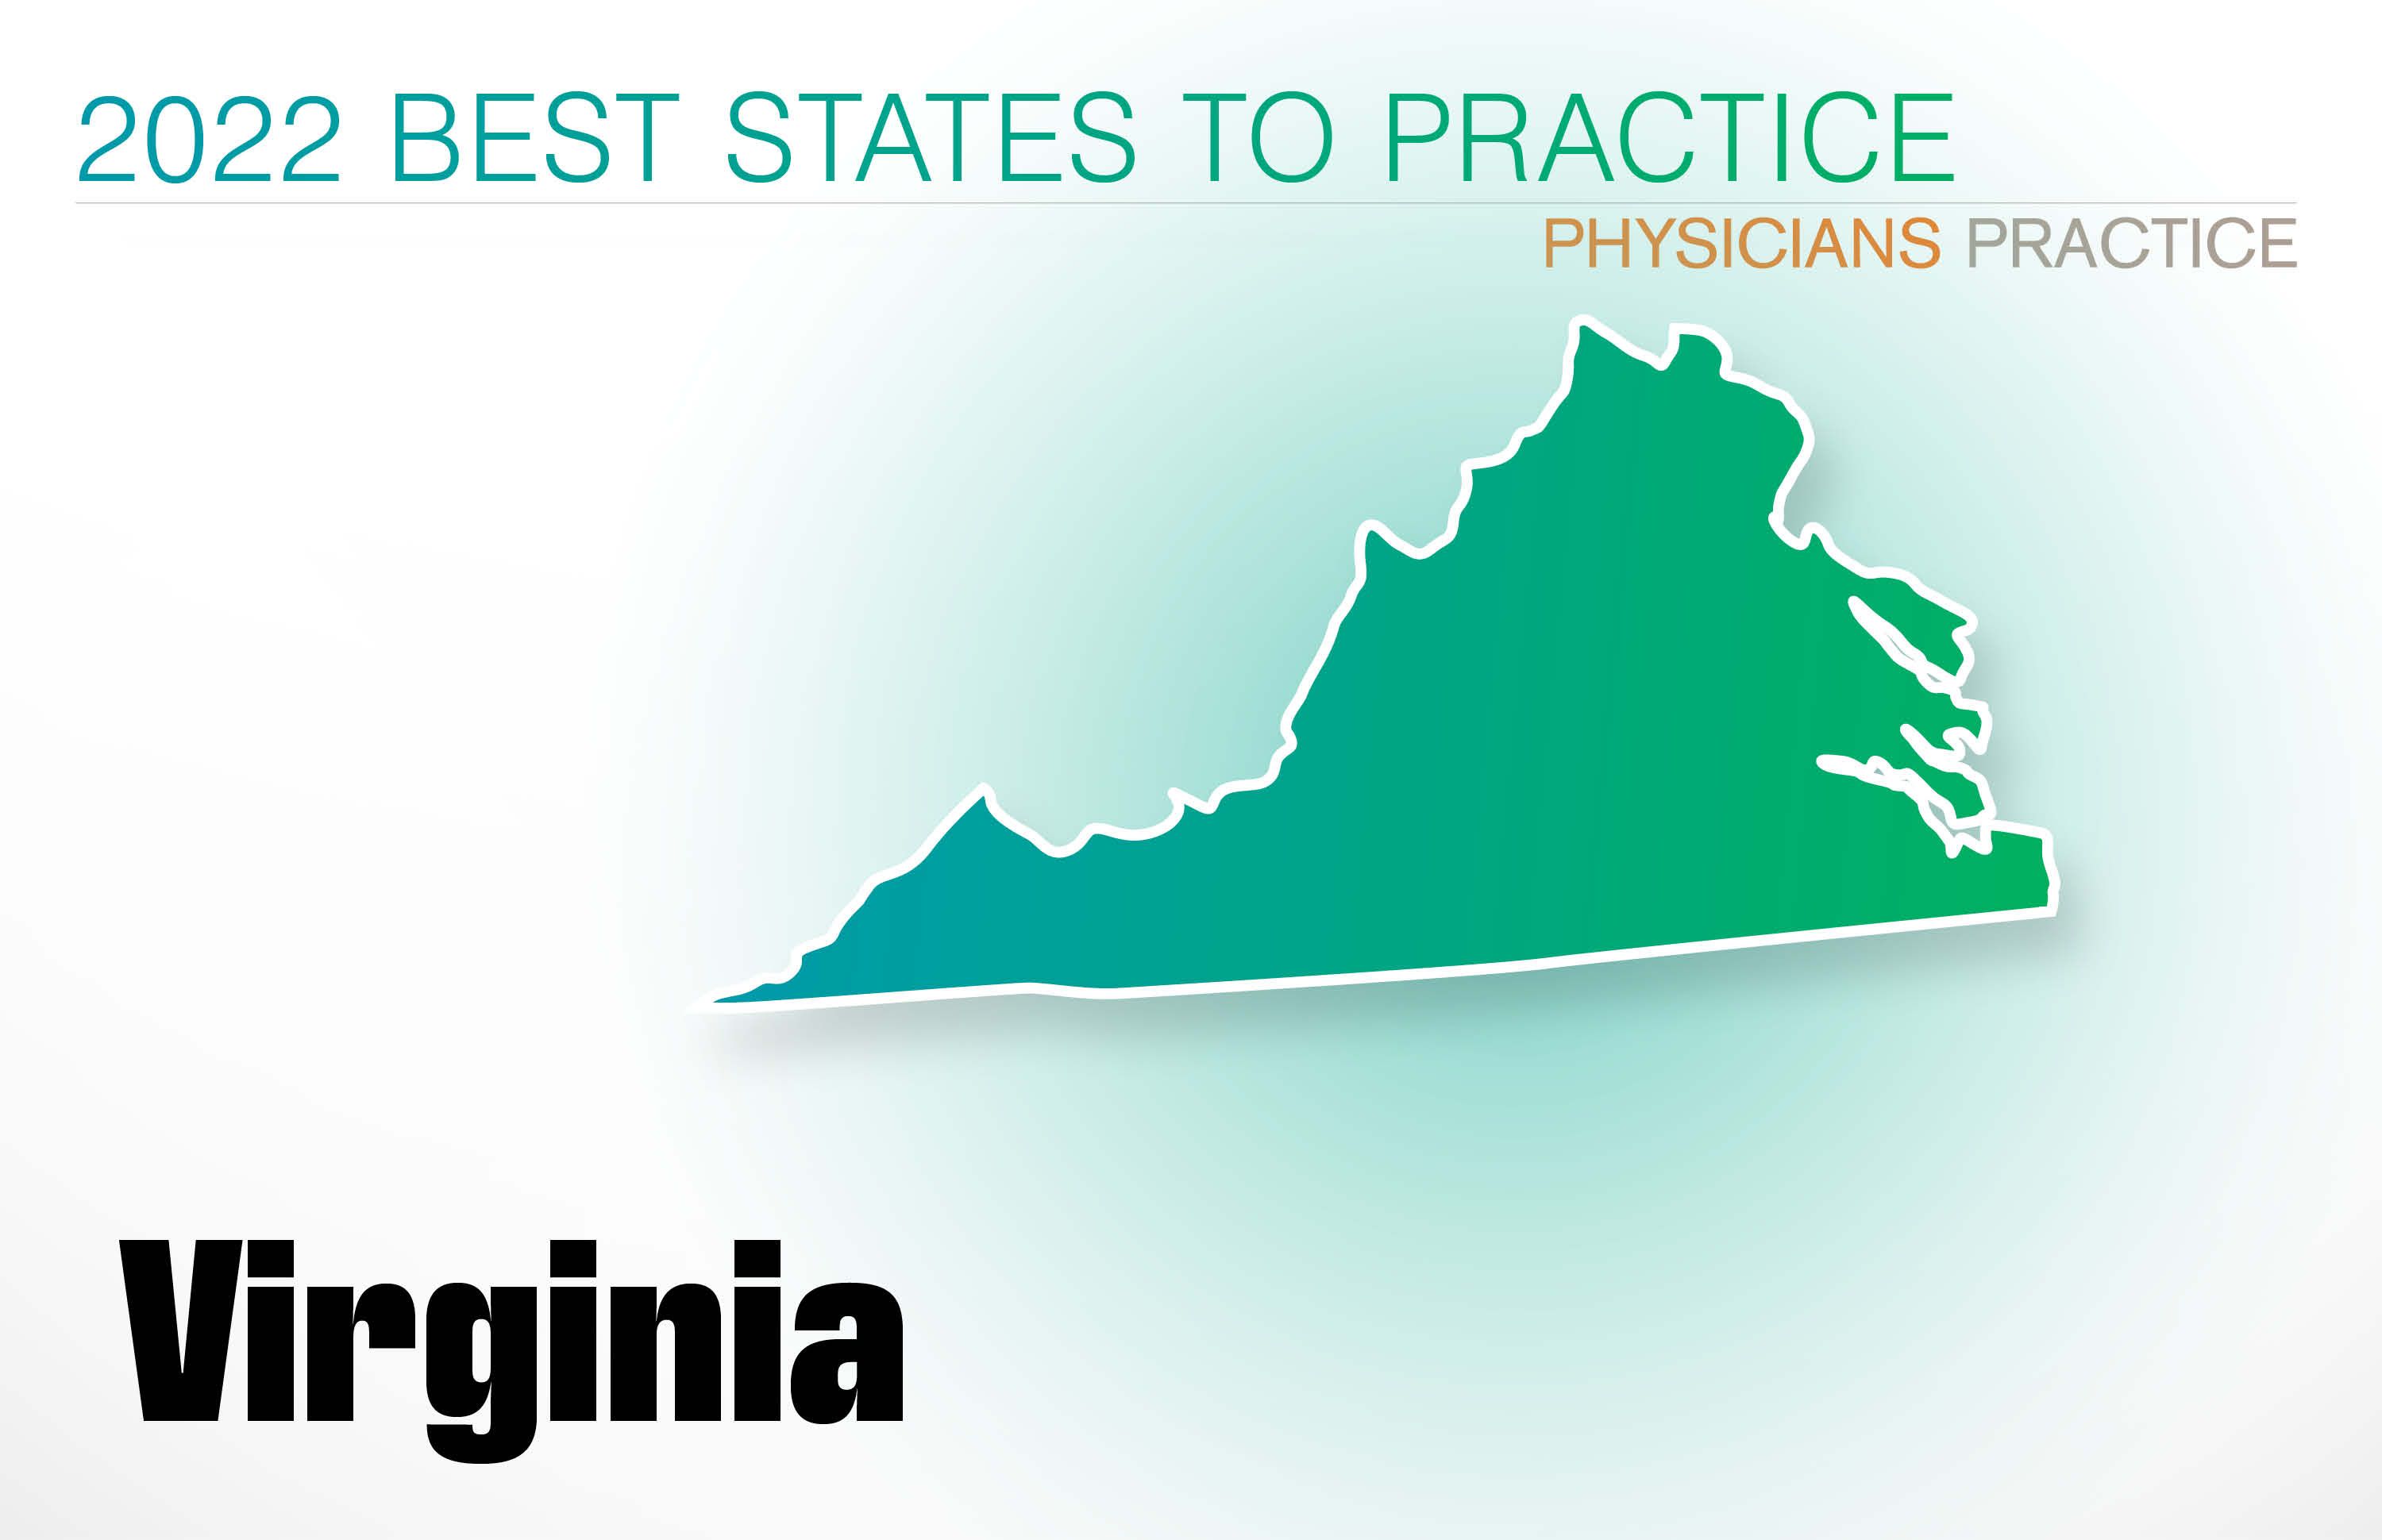 #24 Virginia Rankings: Cost of living: 31 Physician density: 24 Amount of state business taxes collected: 25 Average malpractice insurance rates: 28 Quality of life: 2 GPCI: 31